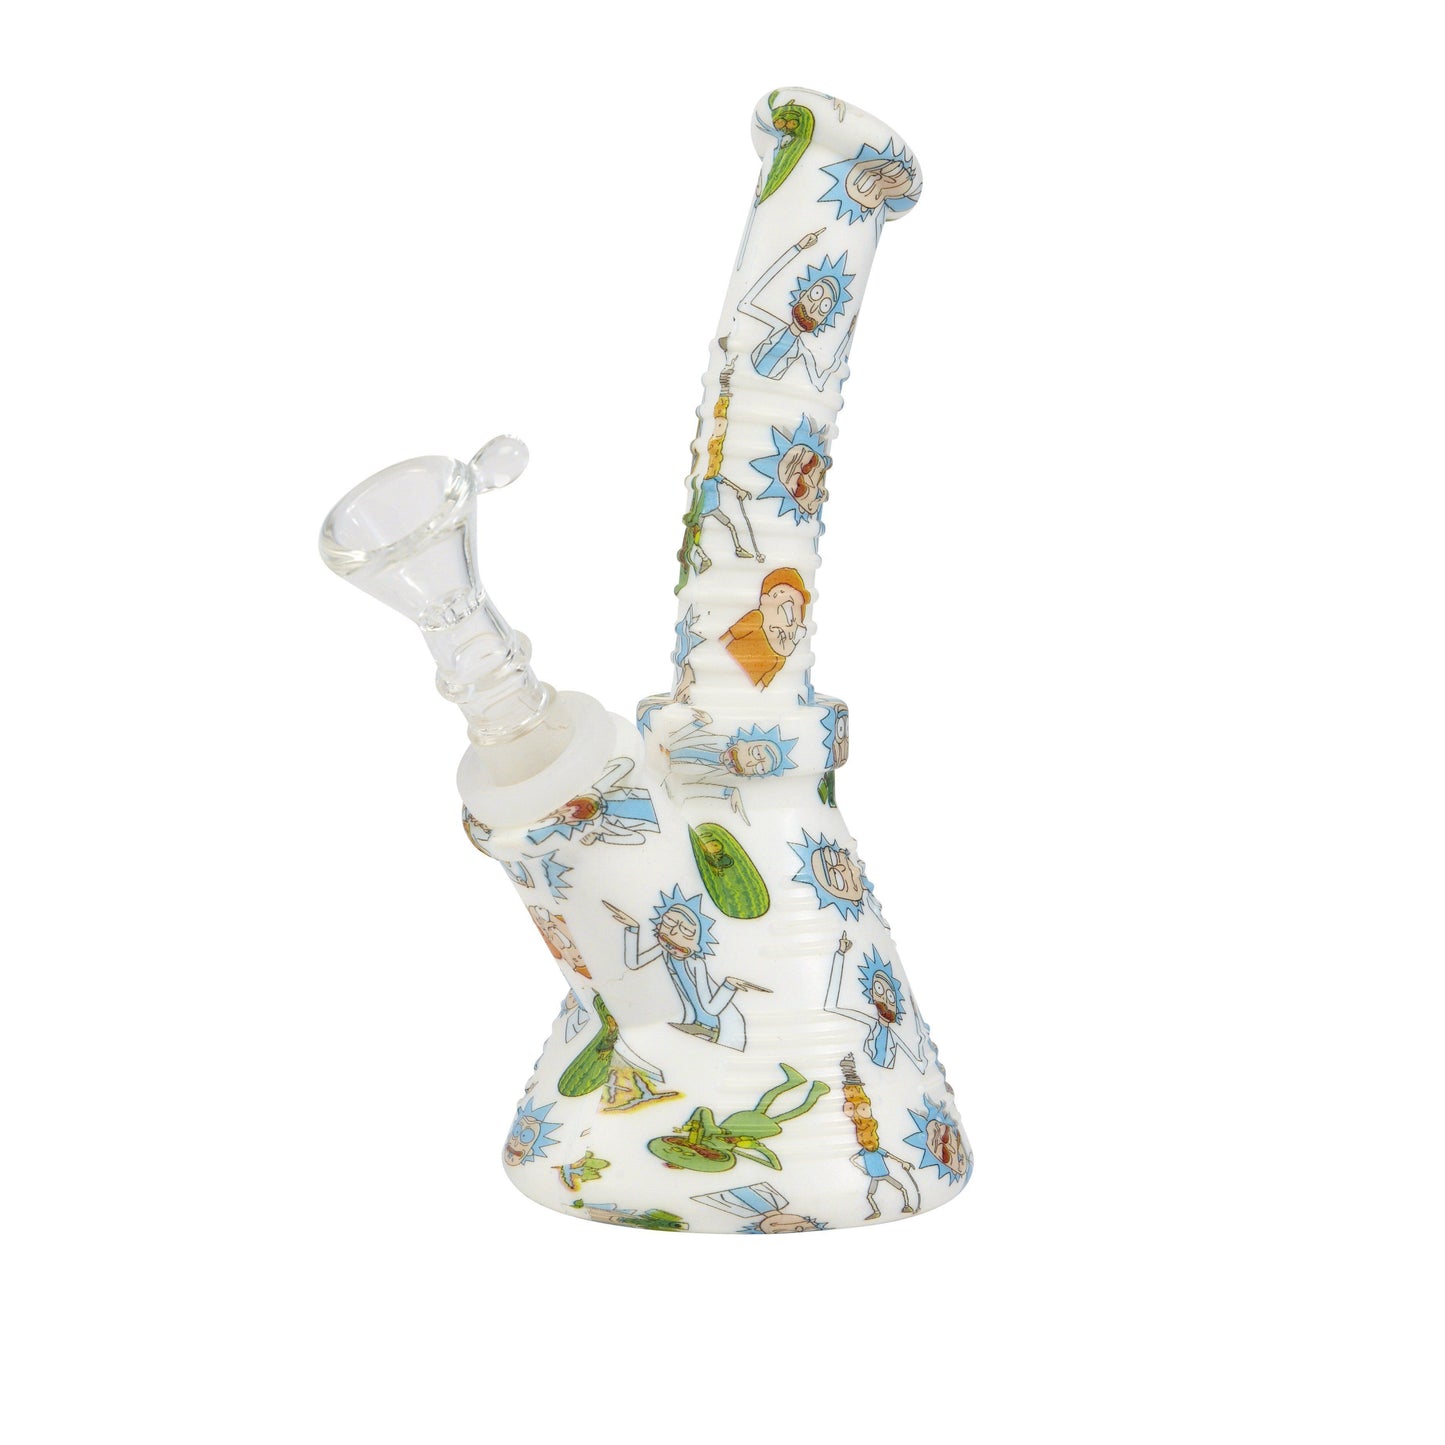 6-inch mini silicone bong smoking device textured ridges shatterproof with fun colorful RnM Rick and Morty prints all over